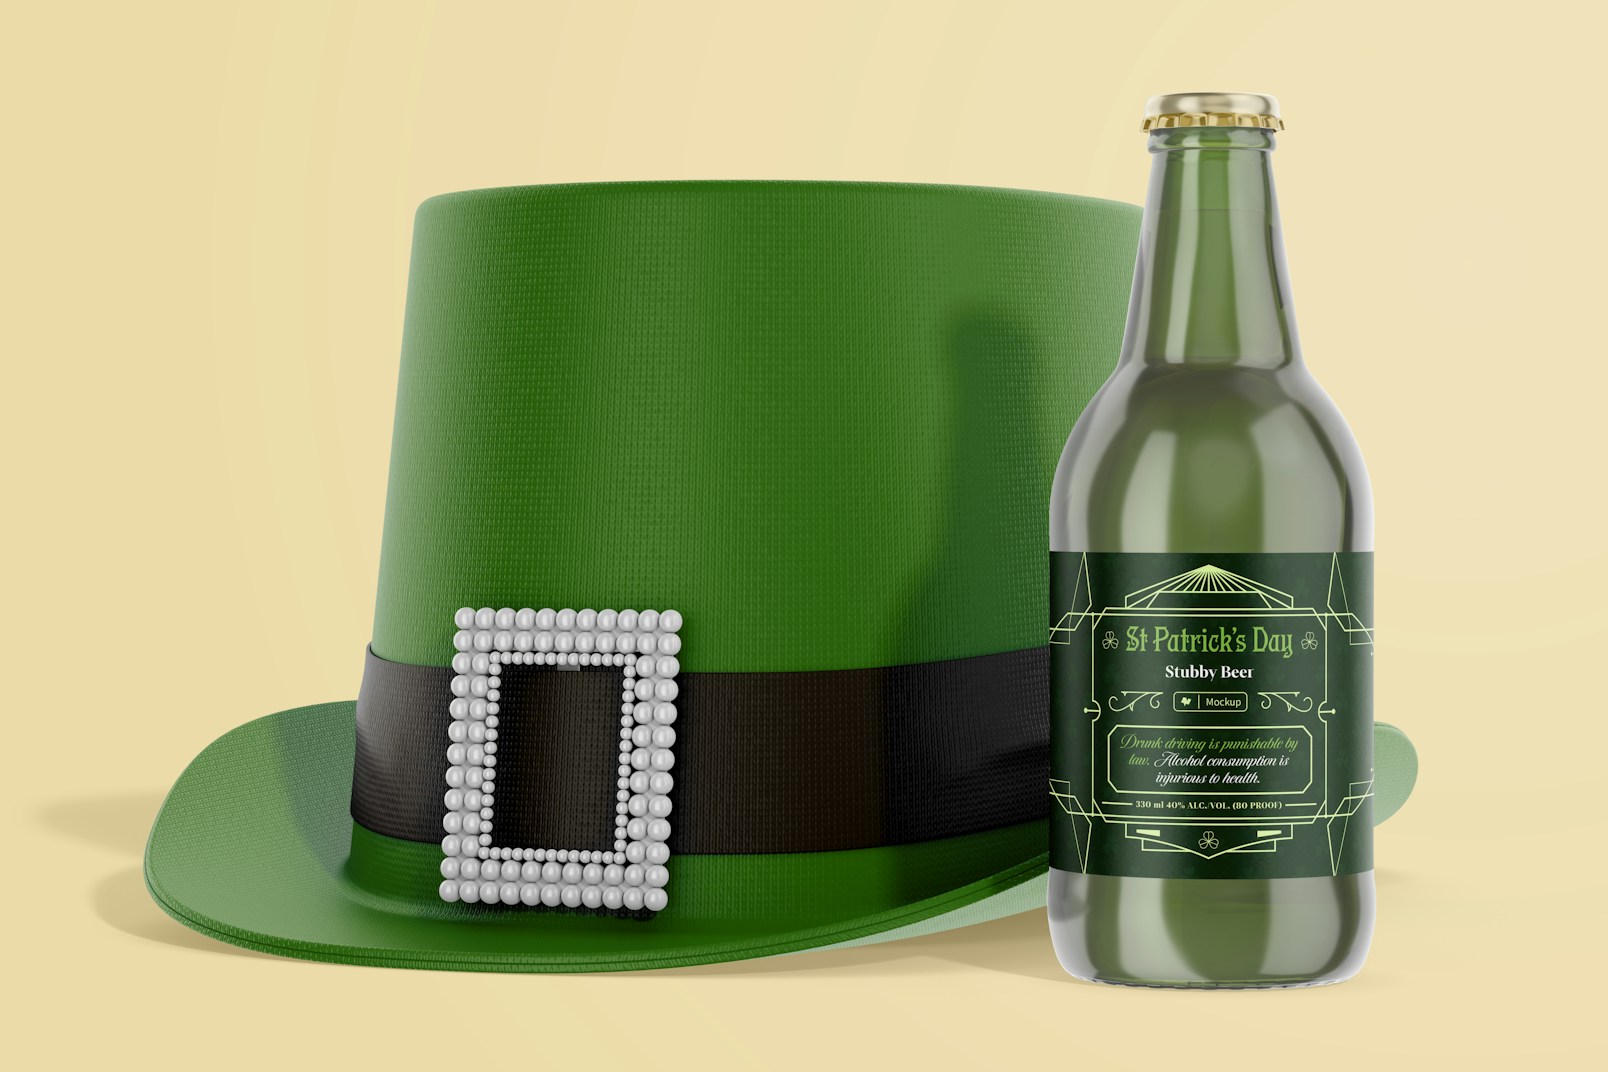 330 ml Stubby Beer Bottle Mockup, with Hat